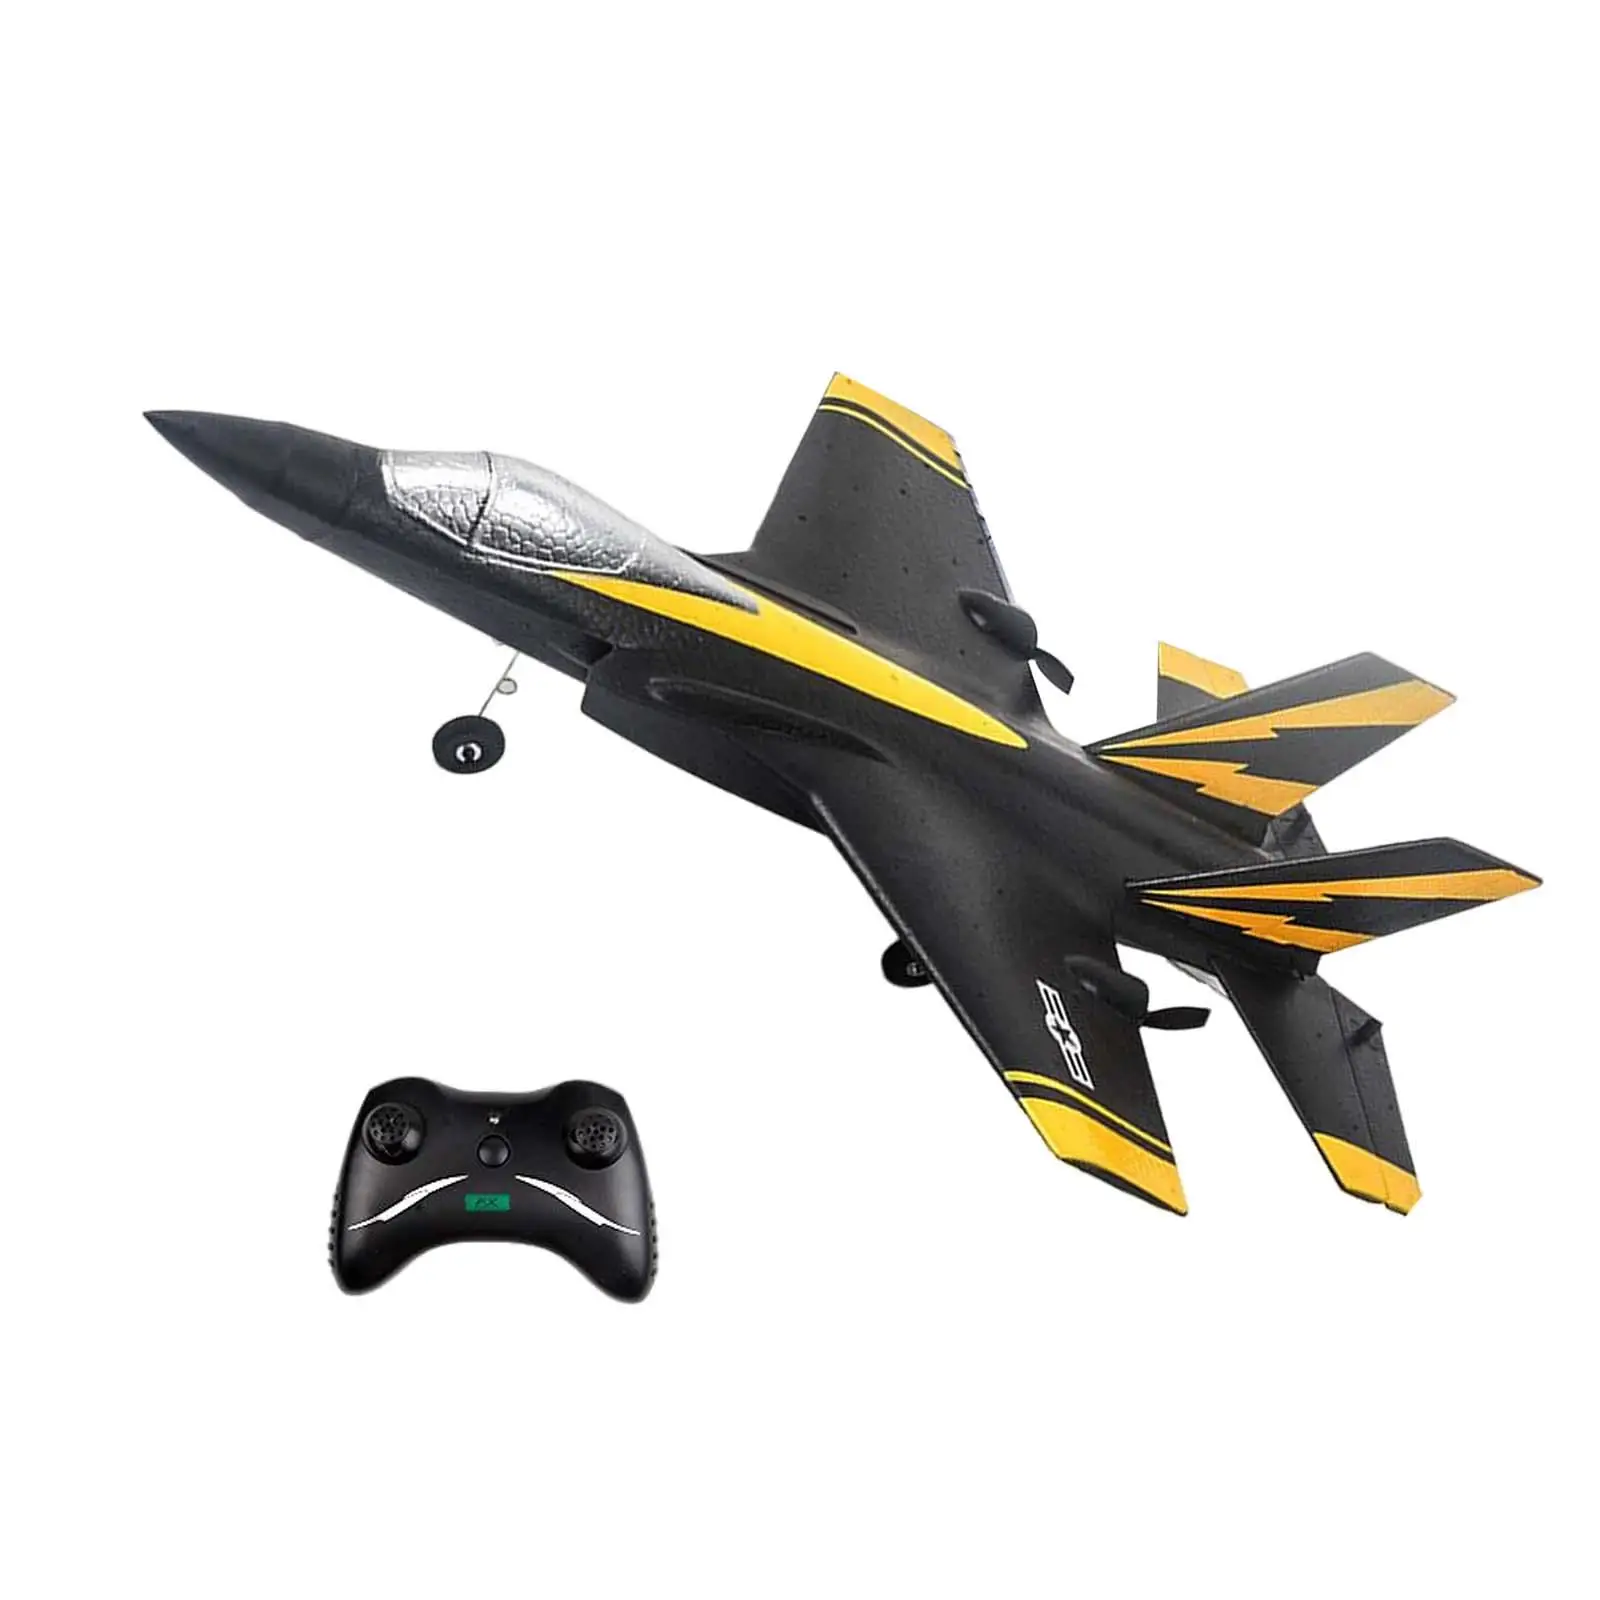 2.4G Remote Control Airplane F35 RC Fighter Glider, Easy to Control Easy Operate Fixed Wing USB Charging Durable for Kids Indoor